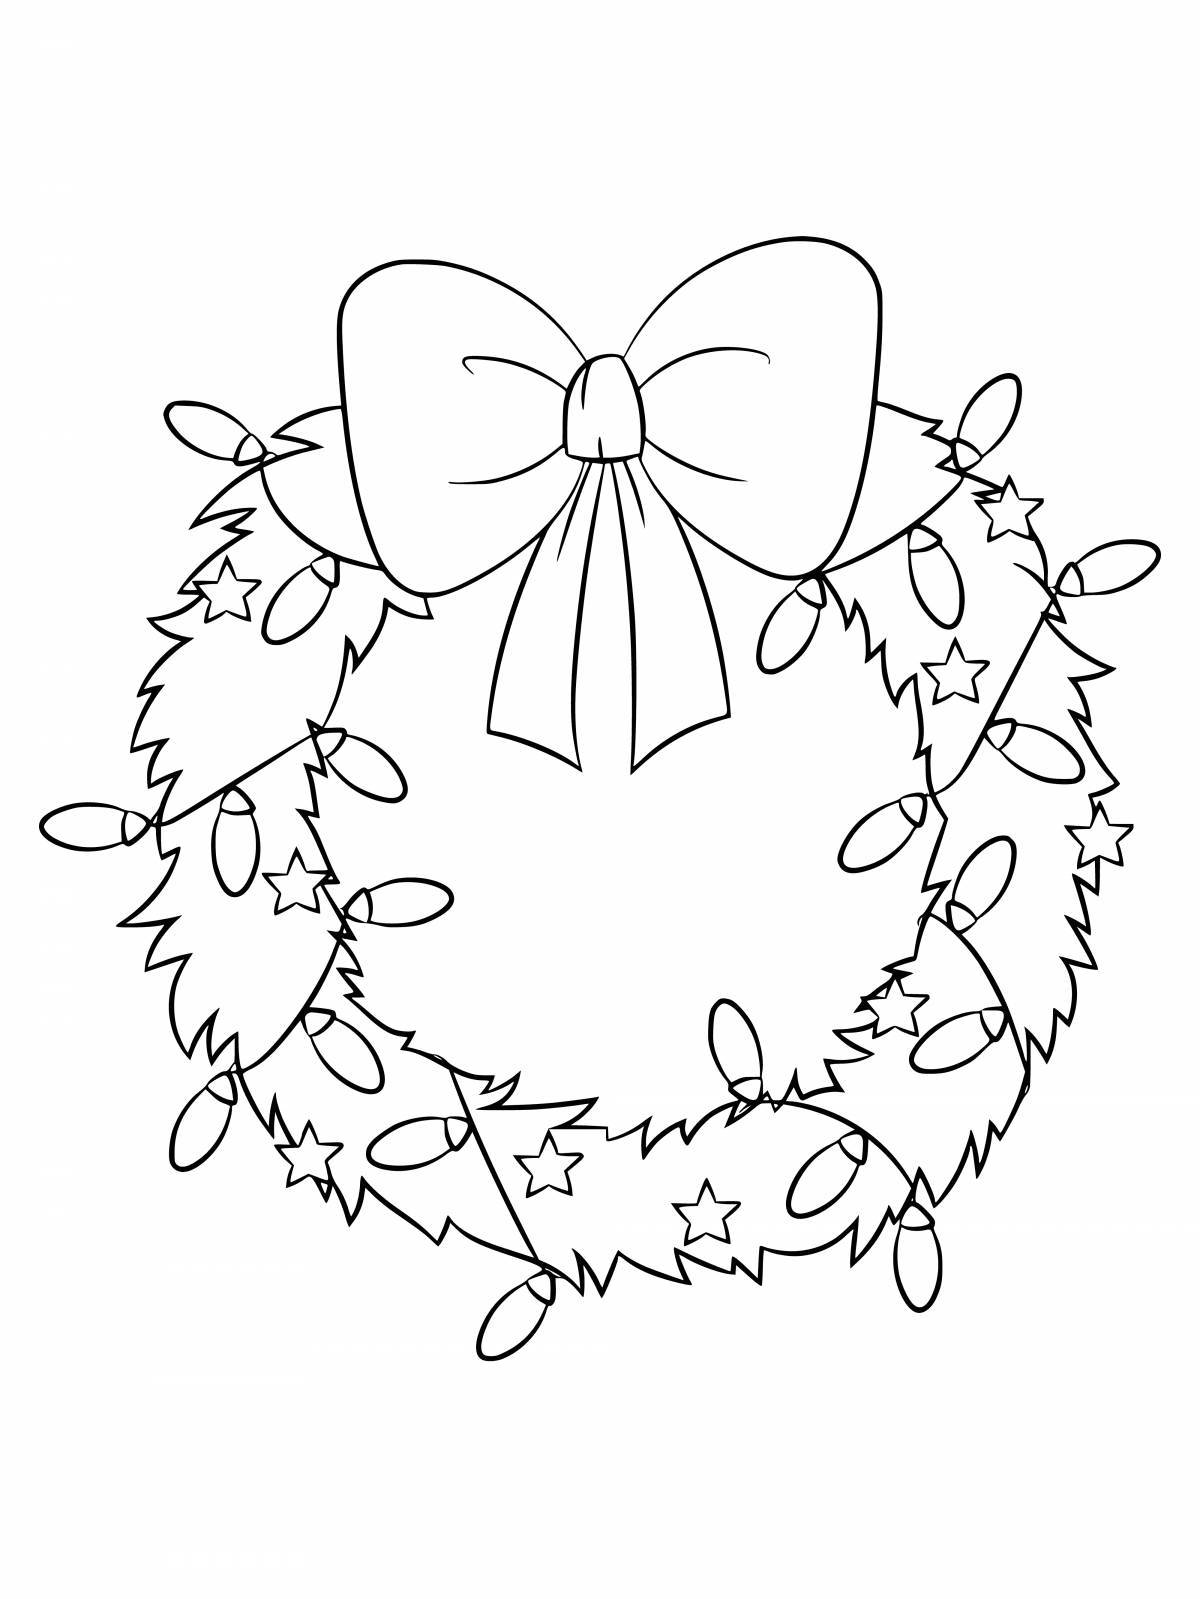 Coloring bright Christmas wreath